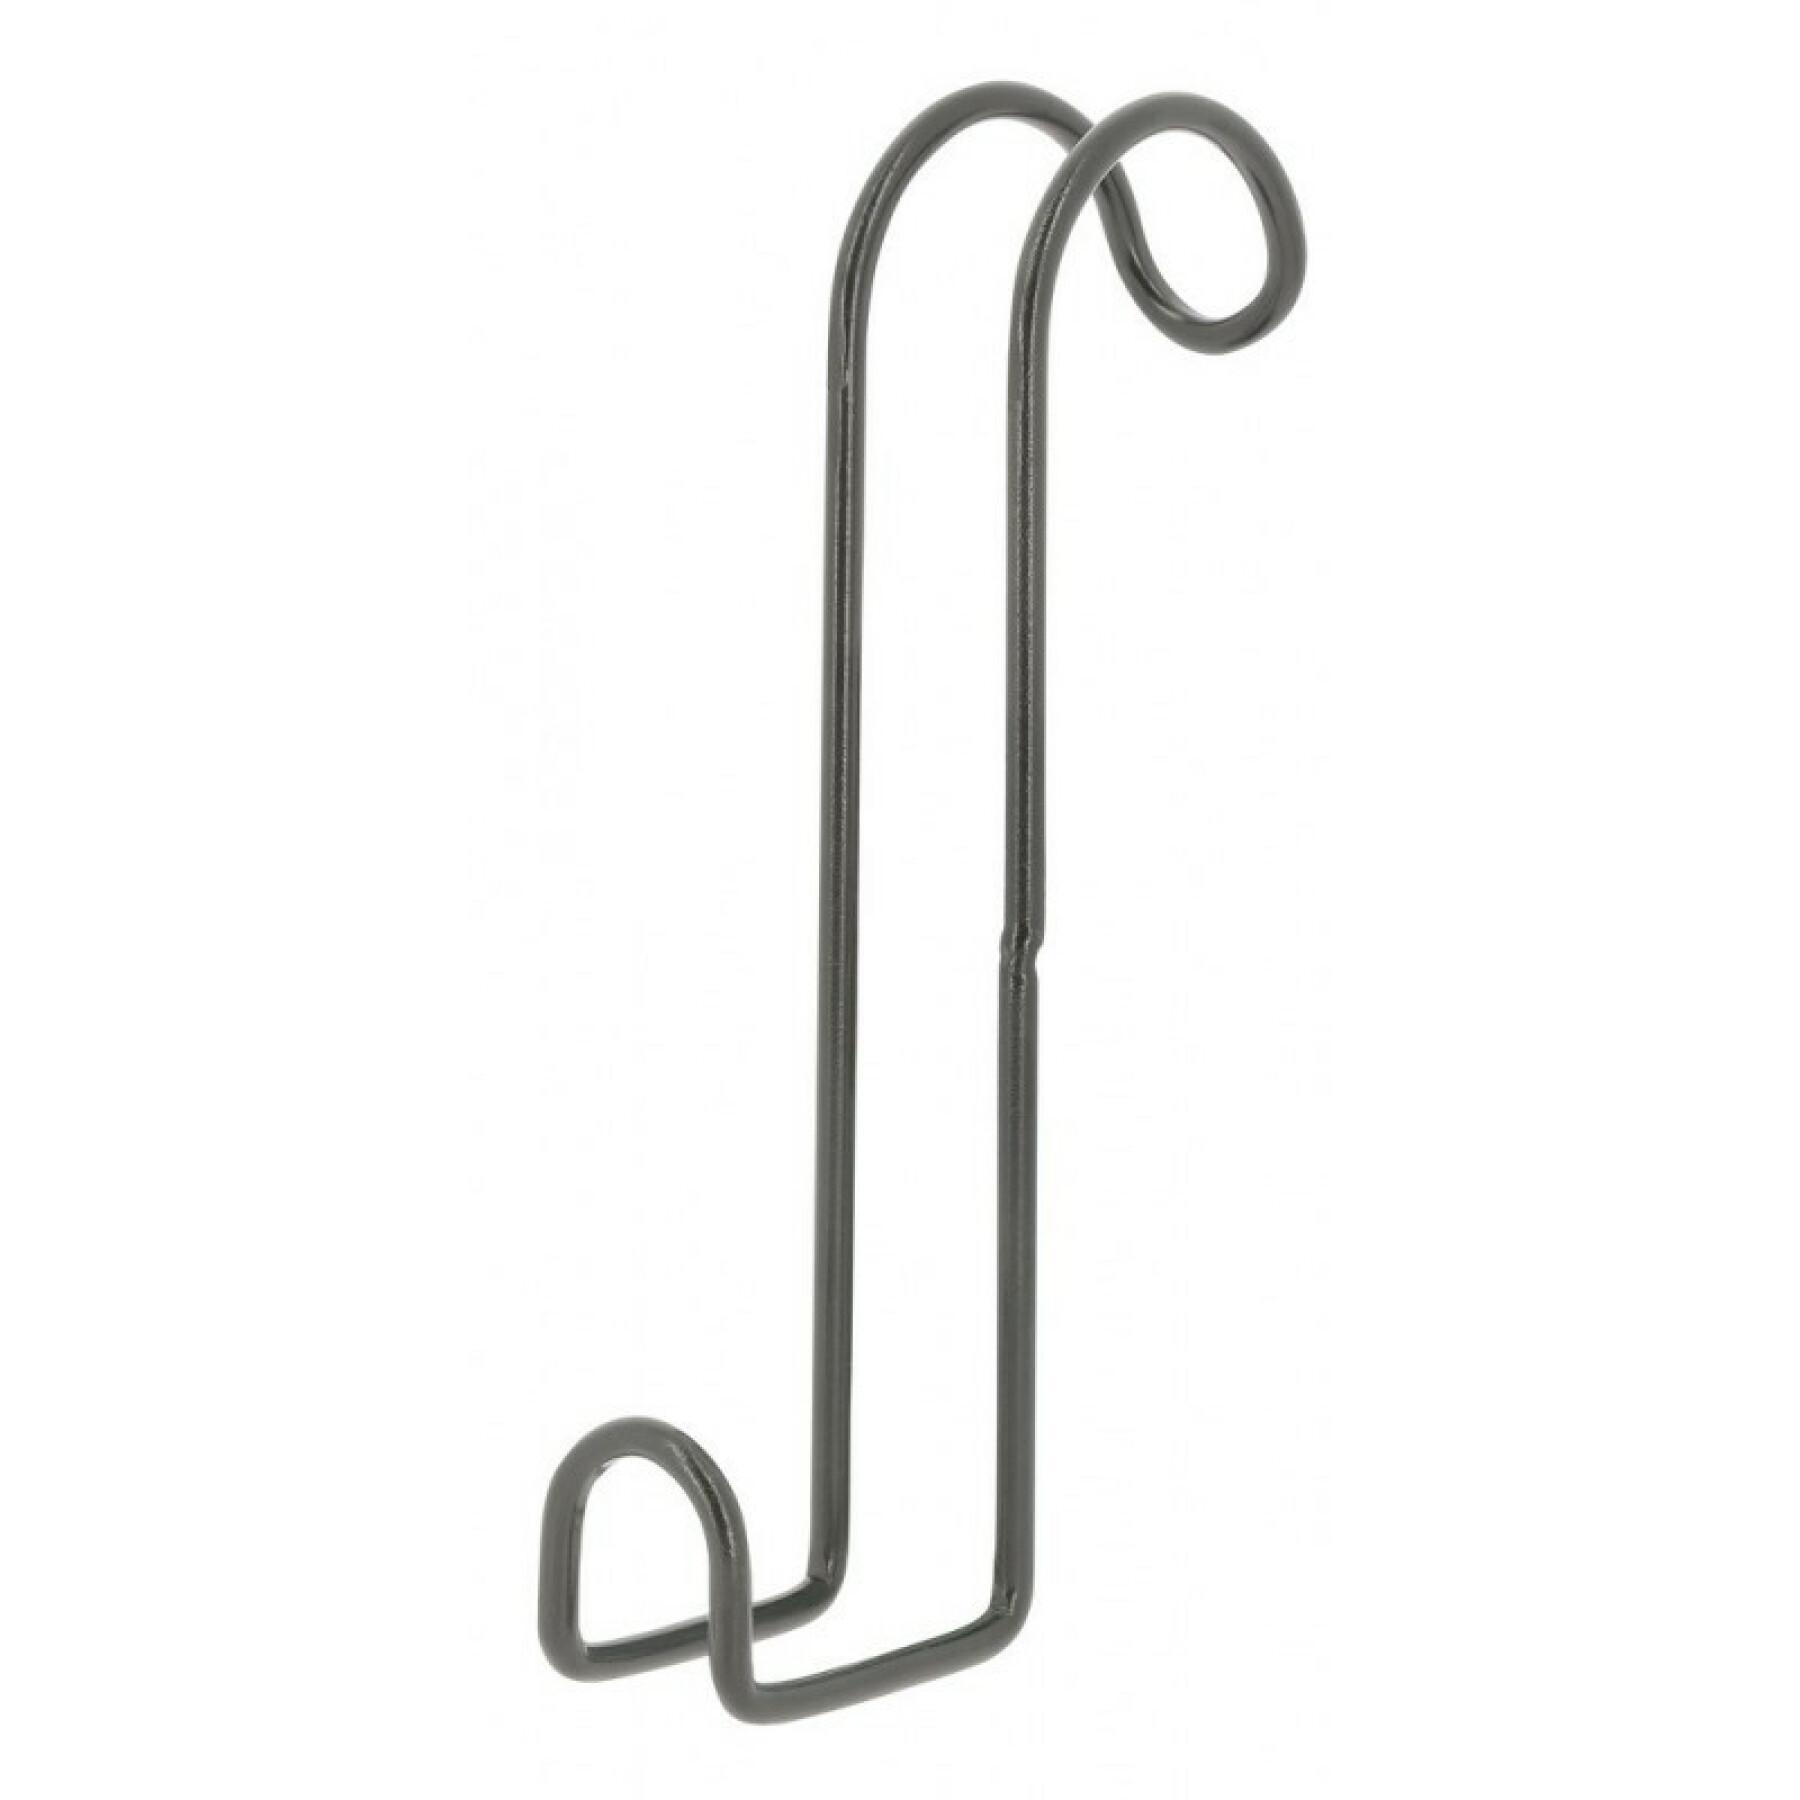 Hippotonic riding bridle holder with hooks